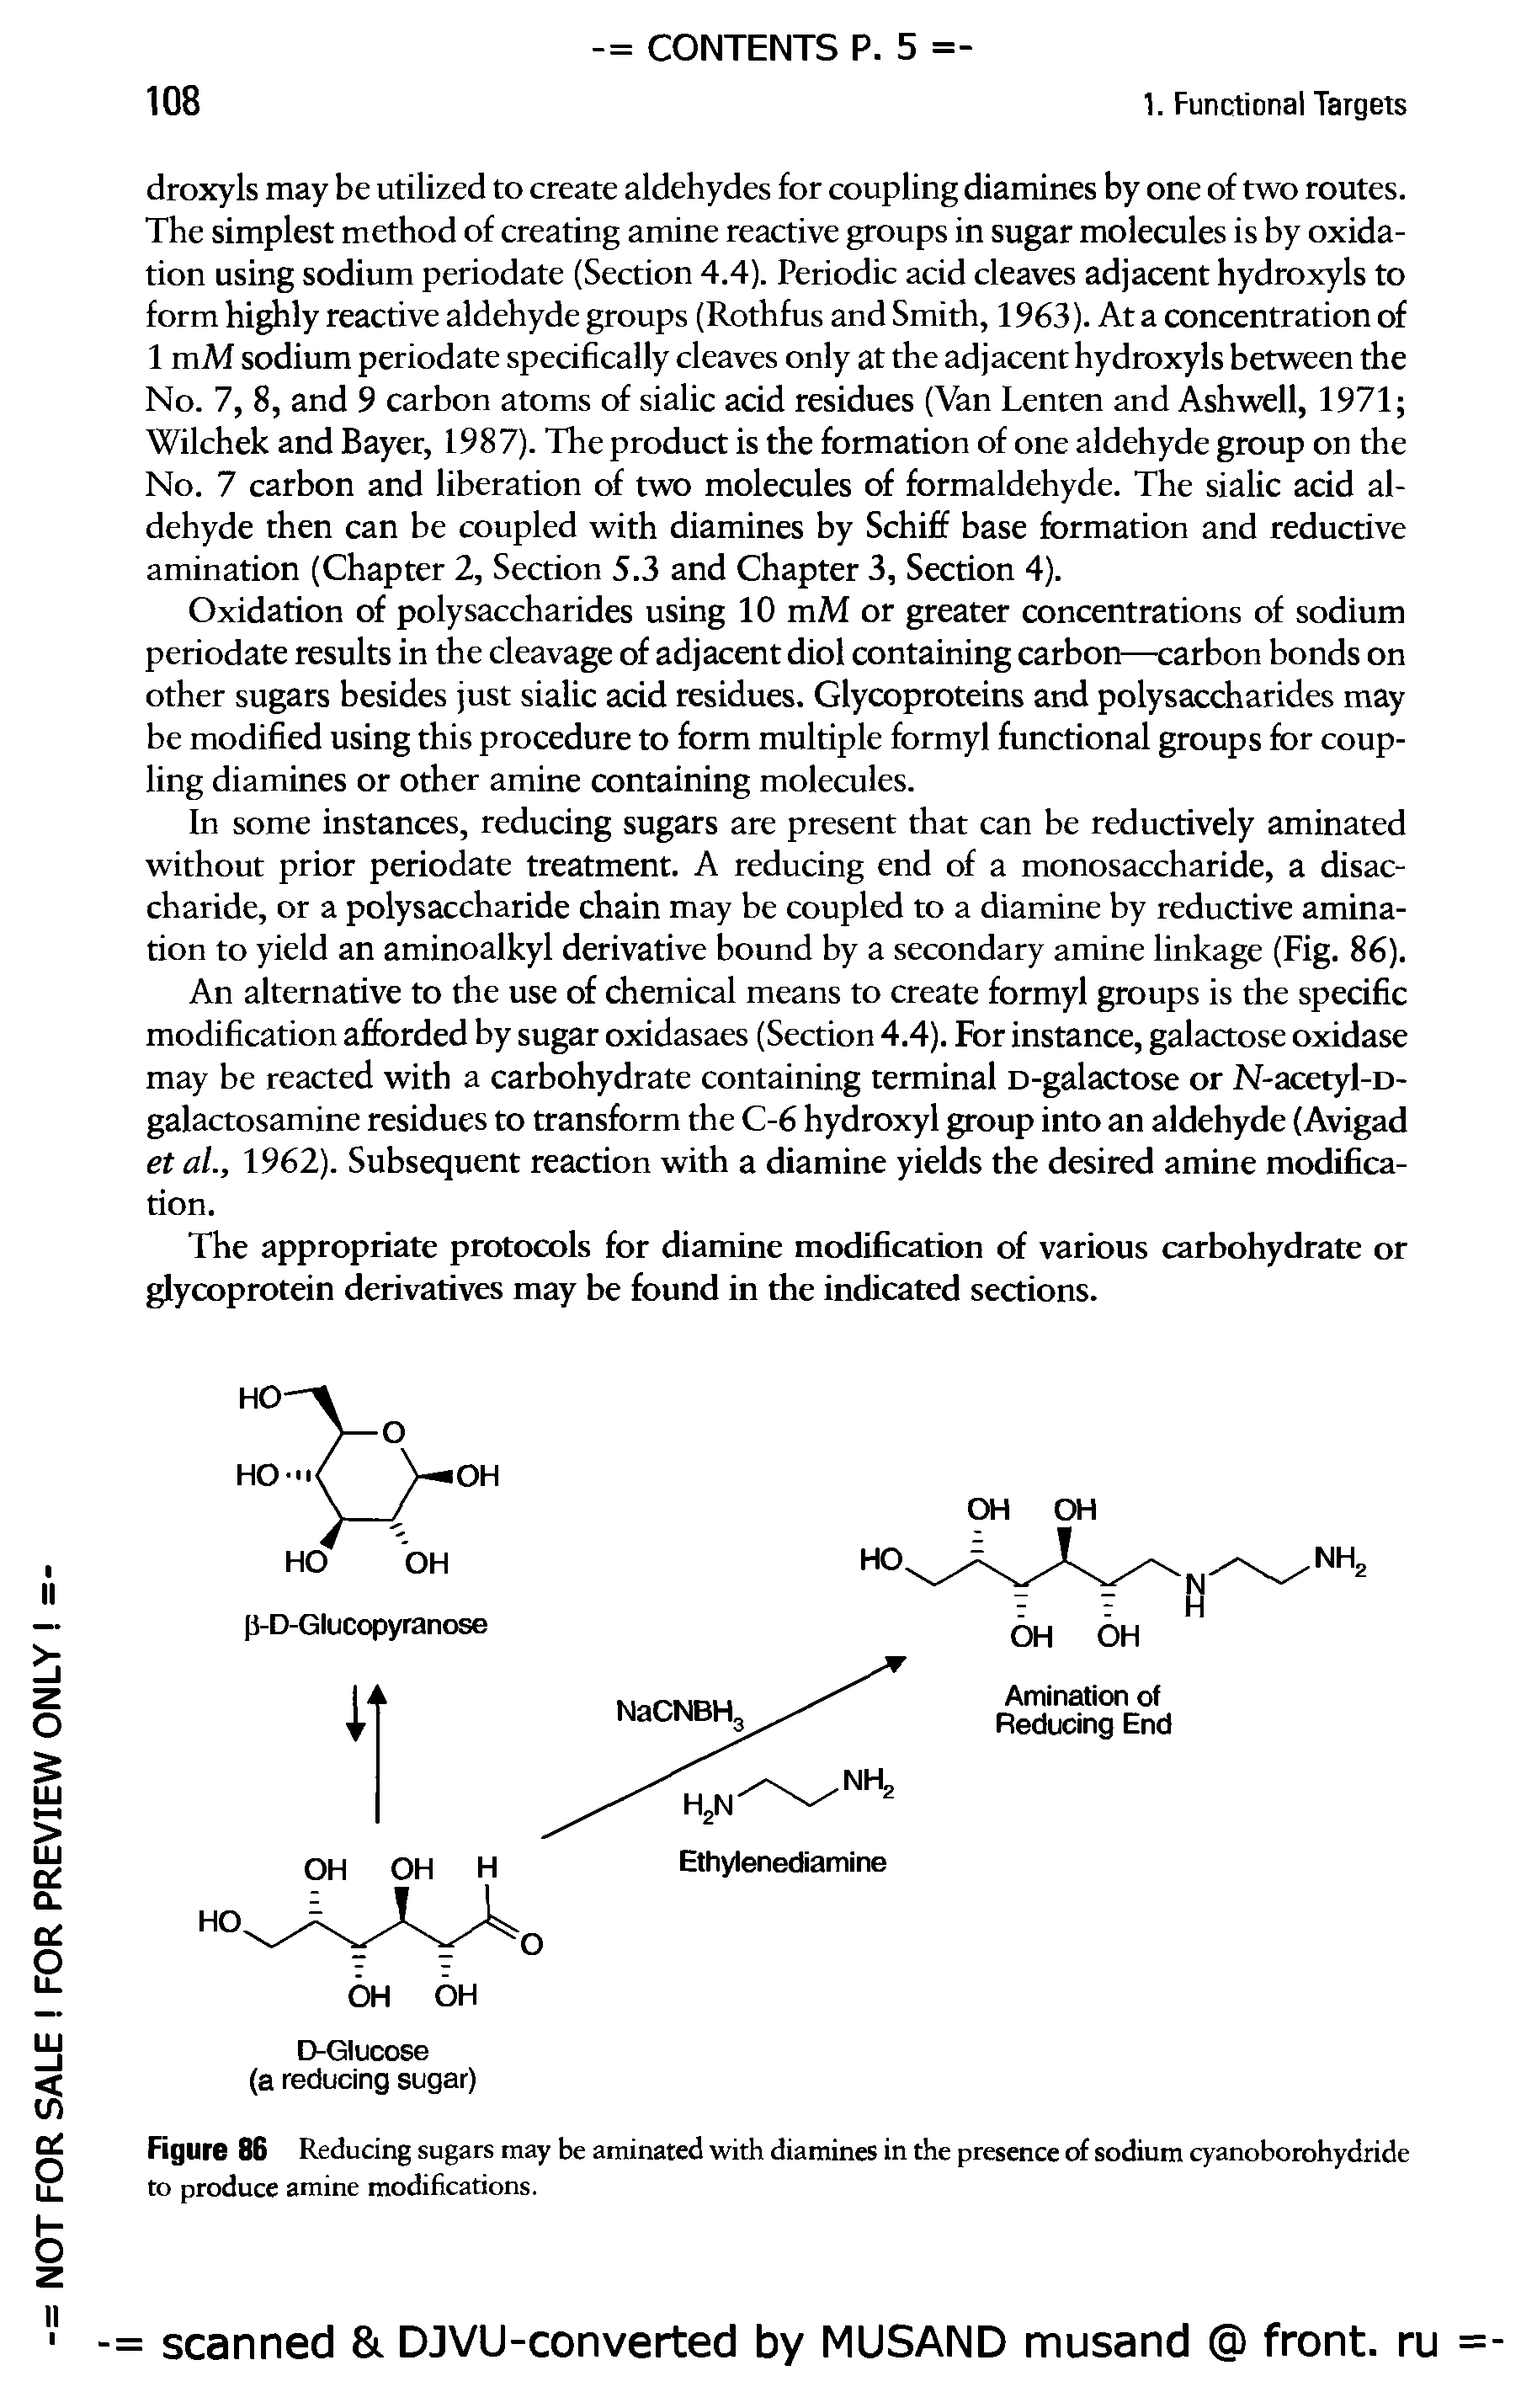 Figure 86 Reducing sugars may be aminated with diamines in the presence of sodium cyanoborohydride to produce amine modifications.